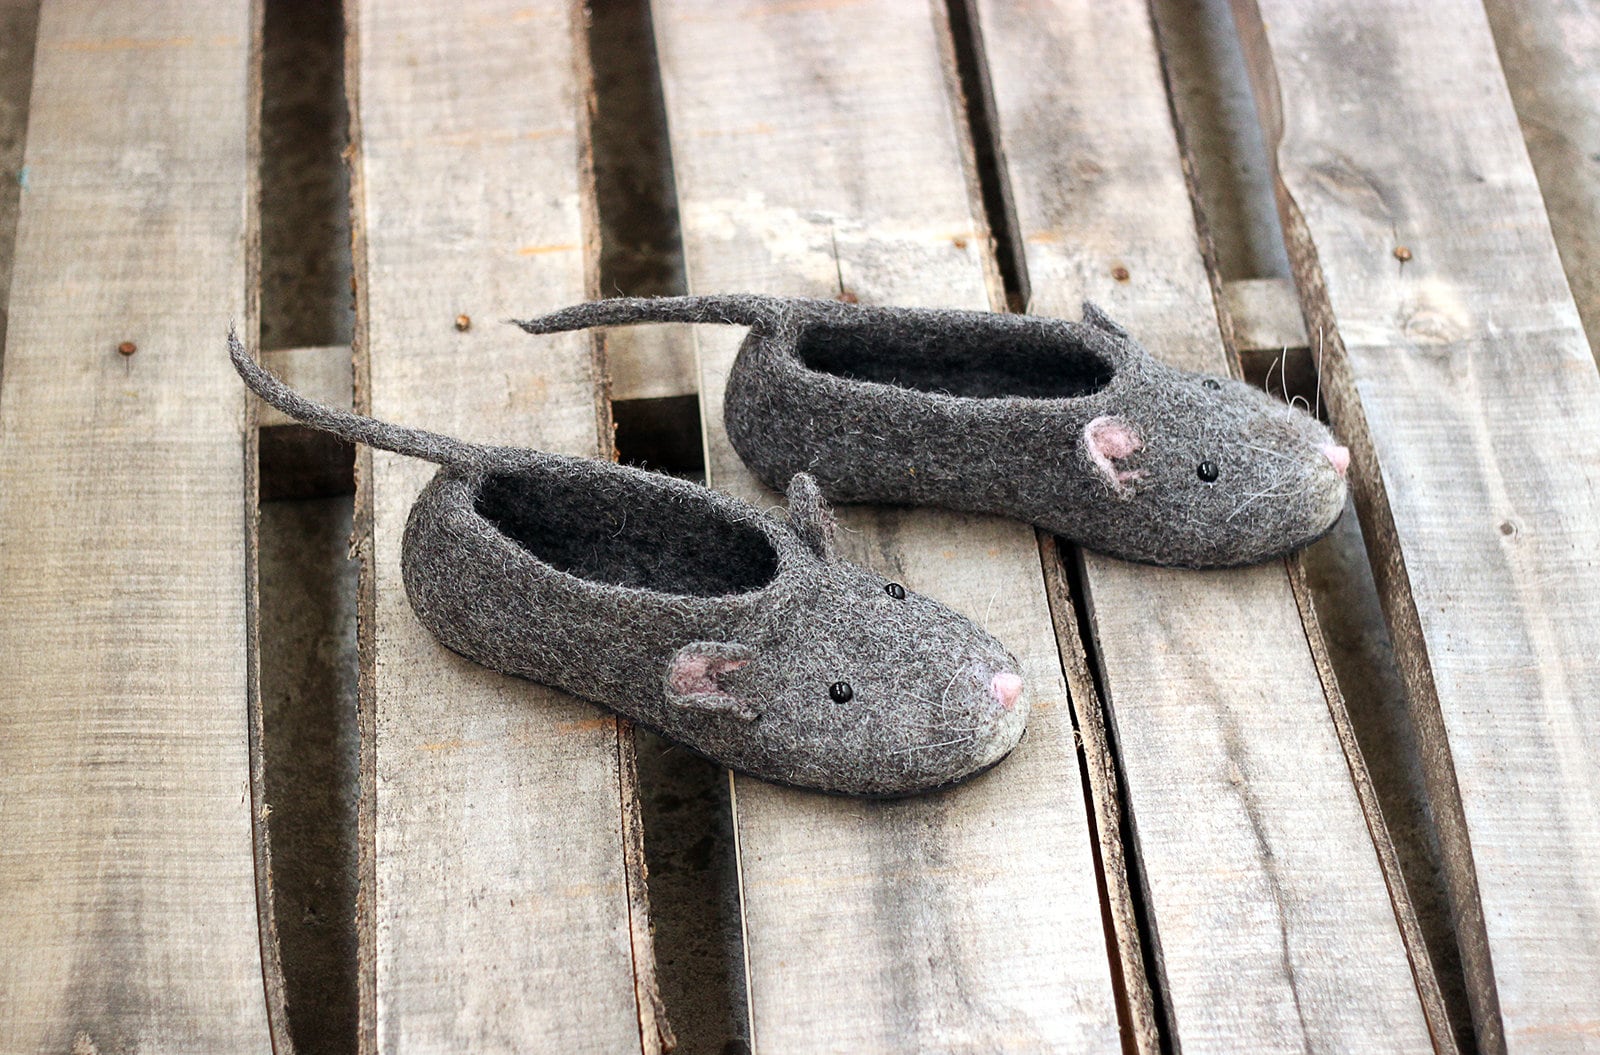 Mouse Woman Slippers Custom Gray Mice Rat Felted - Etsy UK